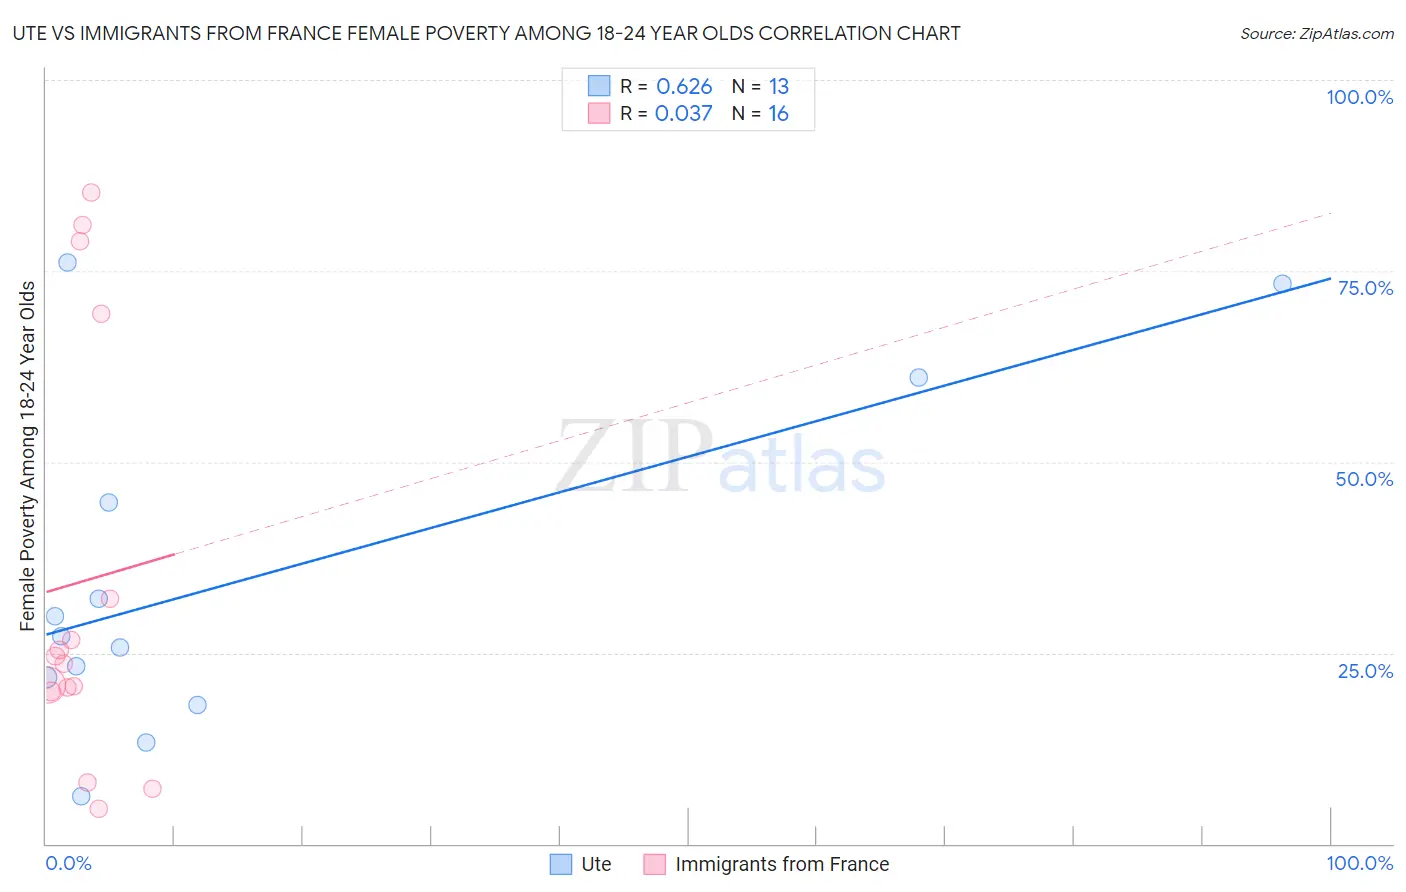 Ute vs Immigrants from France Female Poverty Among 18-24 Year Olds